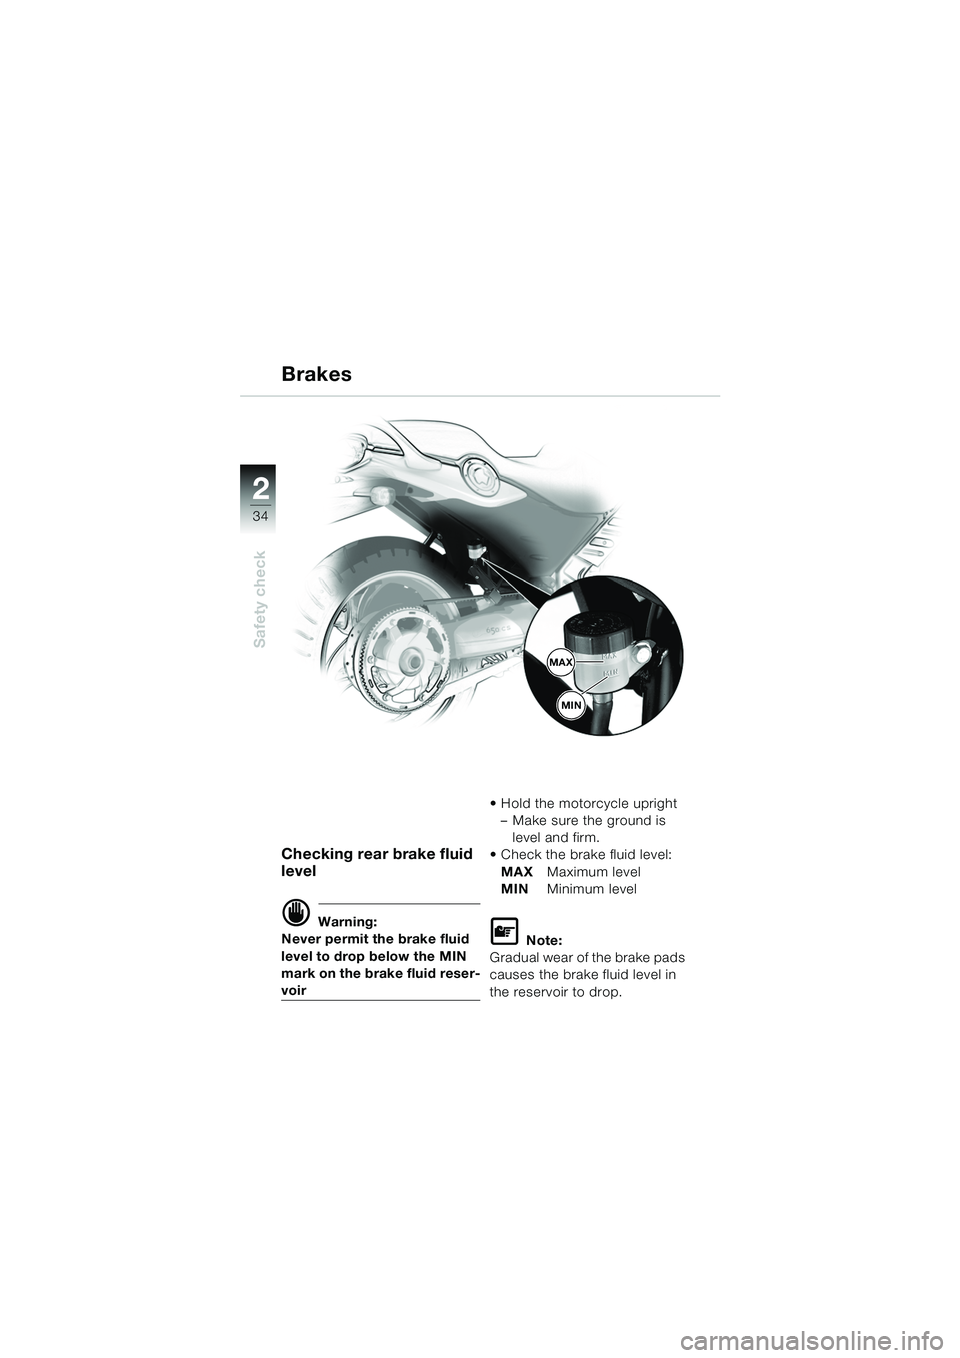 BMW MOTORRAD F 650 CS 2003  Riders Manual (in English) 34
Safety check
2
Checking rear brake fluid 
level
d Warning:
Never permit the brake fluid 
level to drop below the MIN 
mark on the brake fluid reser-
voir  Hold the motorcycle upright
– Make sure